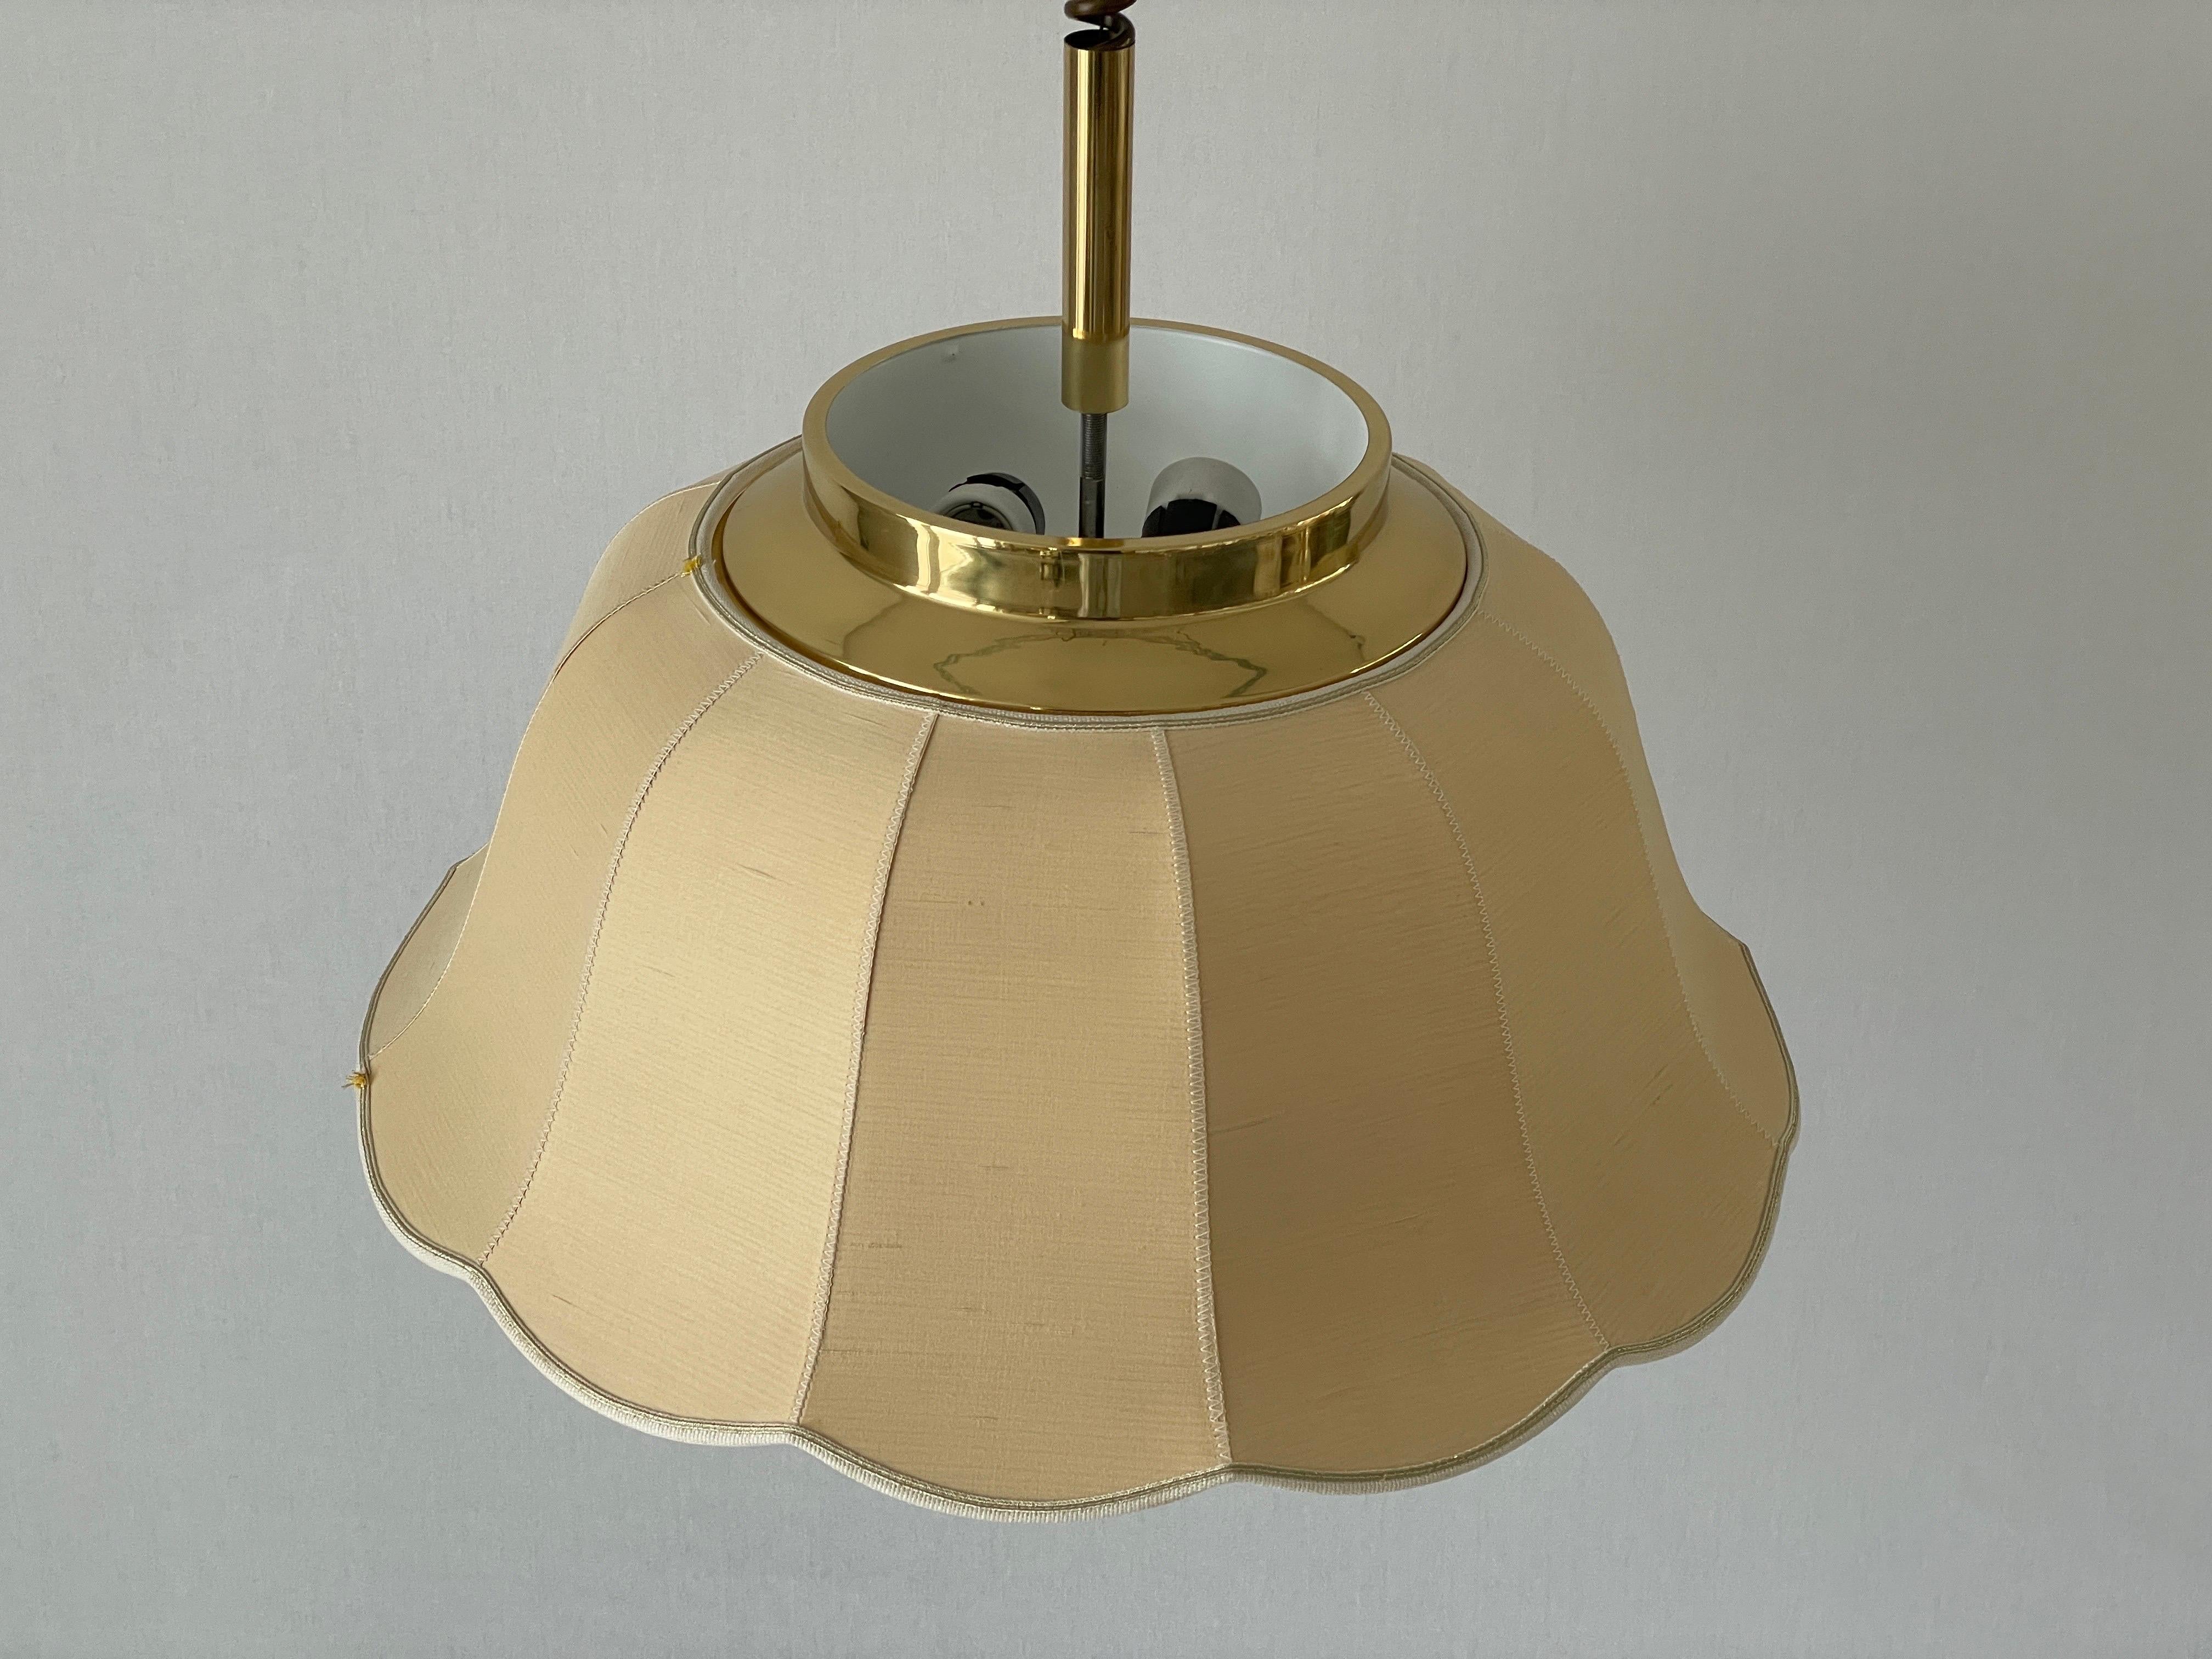 Mid-Century Modern Fabric and Brass 5 socket Adjustable Shade Pendant Lamp by WKR, 1970s, Germany For Sale